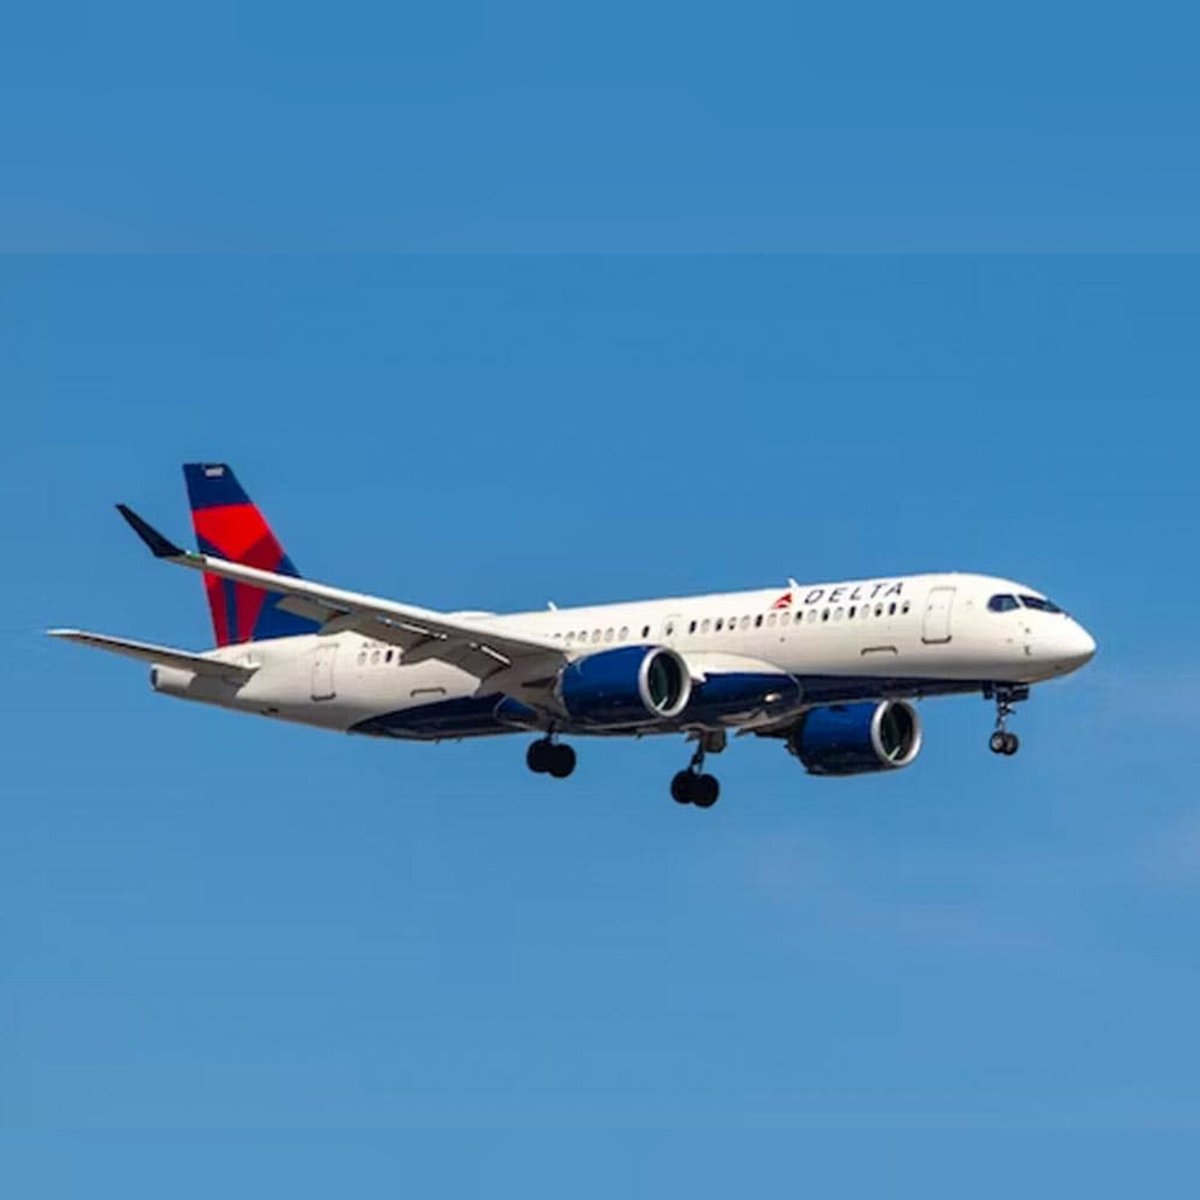 Delta Airlines flight forced to return to JFK after emergency exit slide falls off mid-air. Passengers describe feeling overwhelmed and scared. FAA to investigate. 

Read more on shorts91.com/category/inter…

#DeltaAirlines #EmergencyLanding #Boeing #EmergencyExit